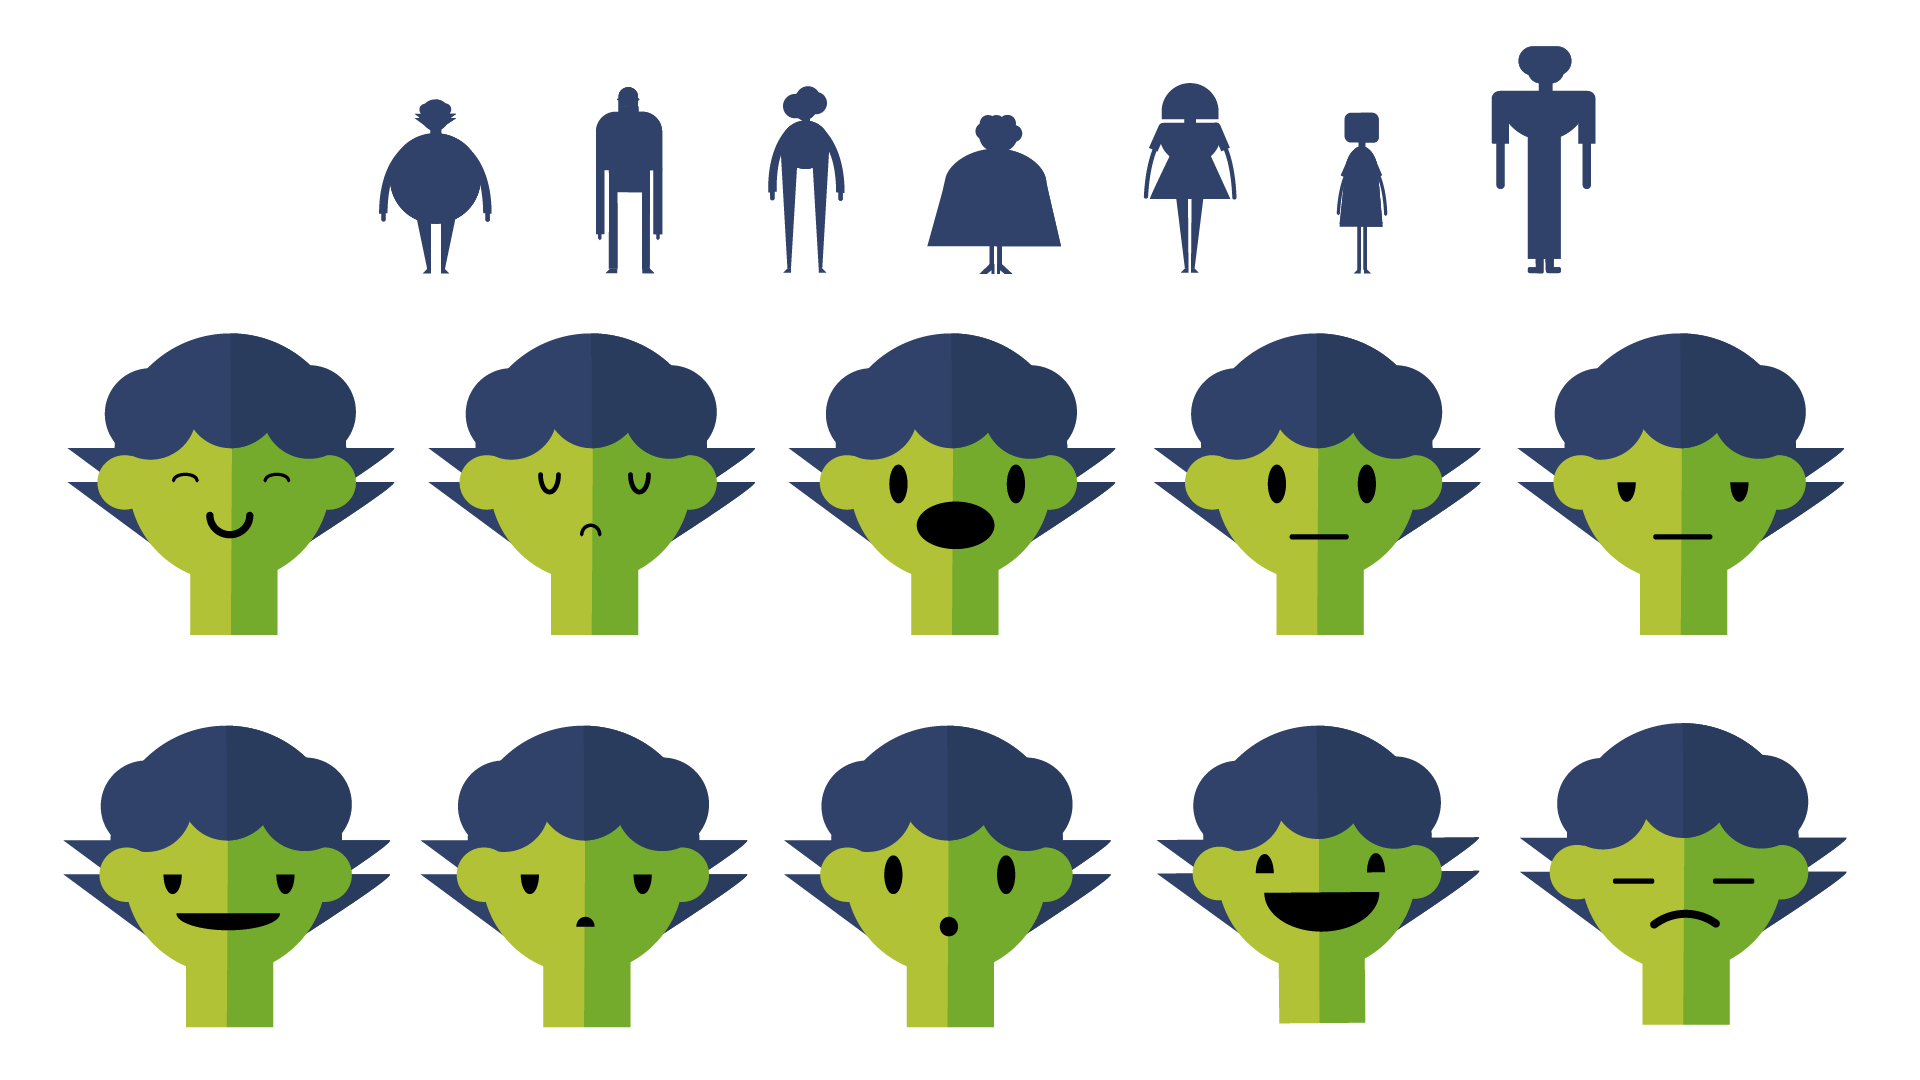 A sheet with a small line up of silhouetted characters, followed by 10 versions of the same head showing different expressions.